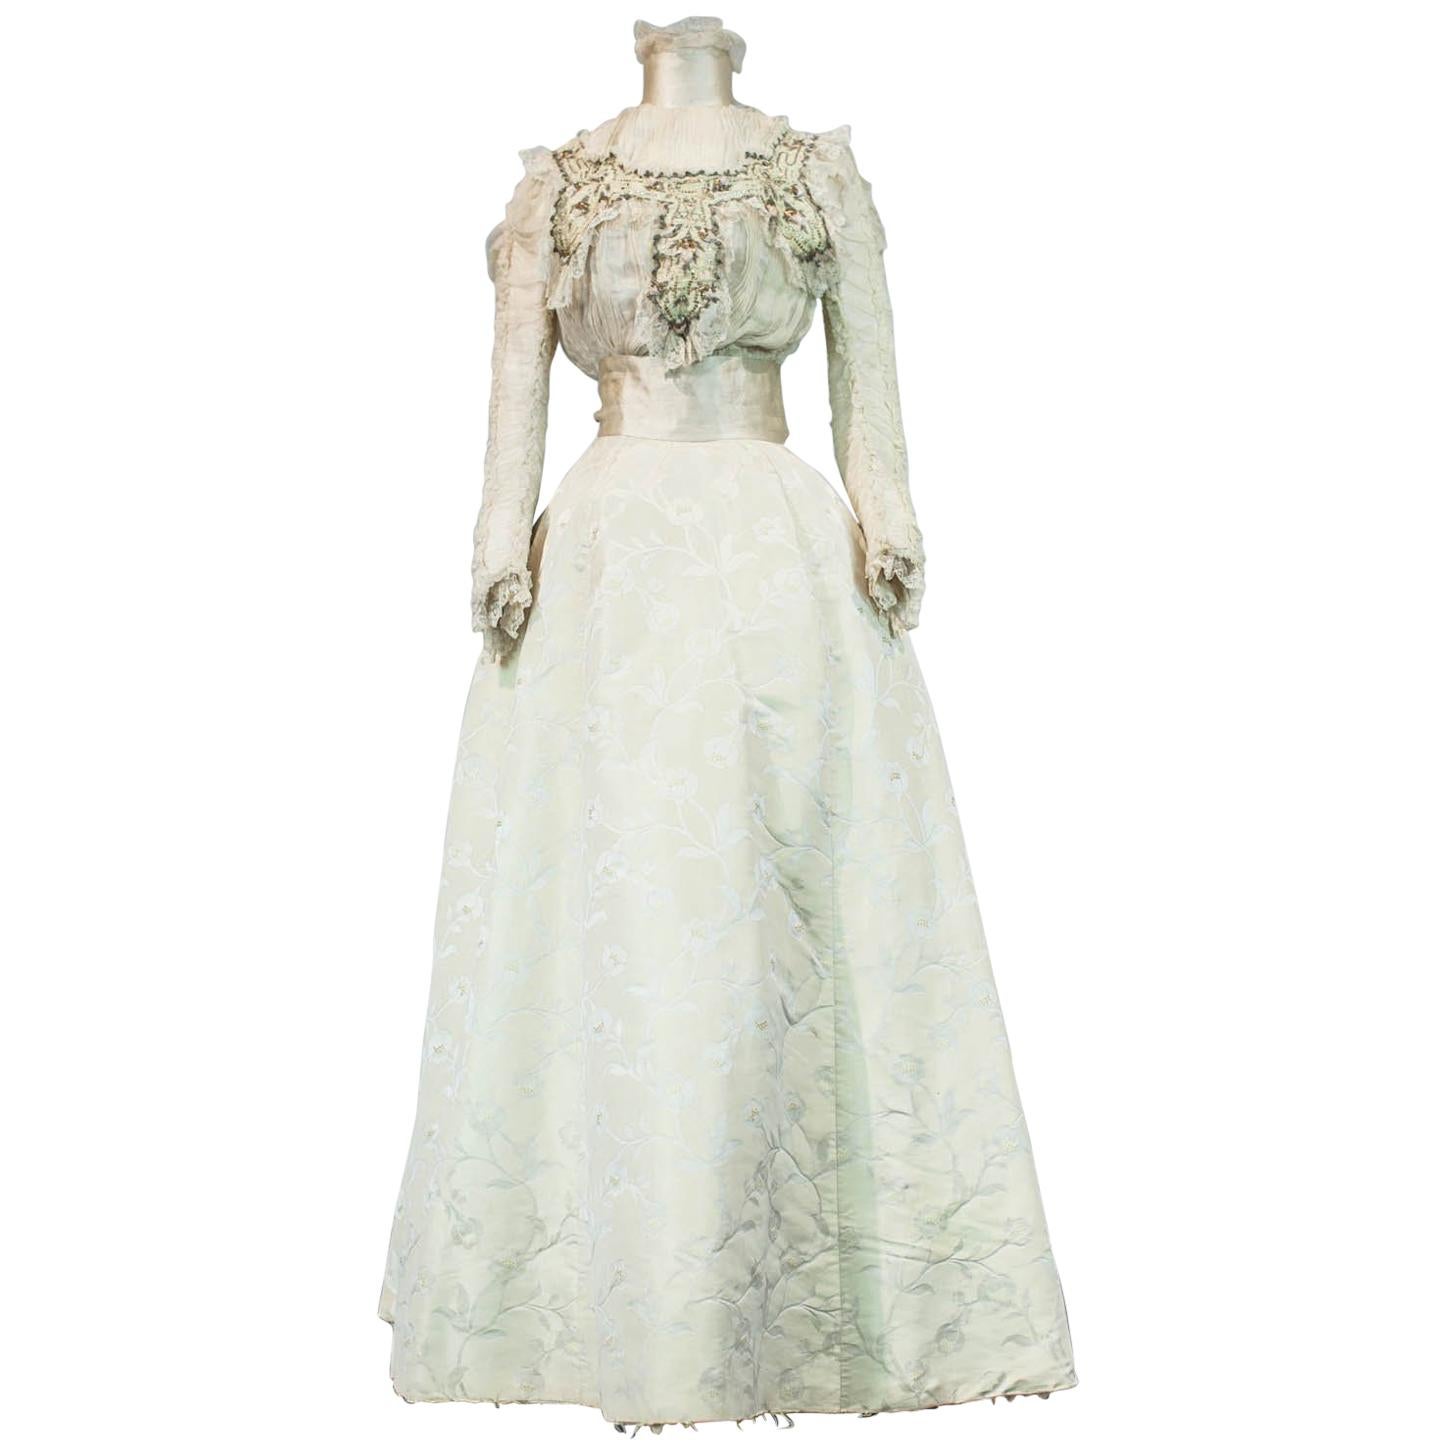 Edwardian Damask and Chiffon Silk Ceremony French Labelled Gown Circa 1900